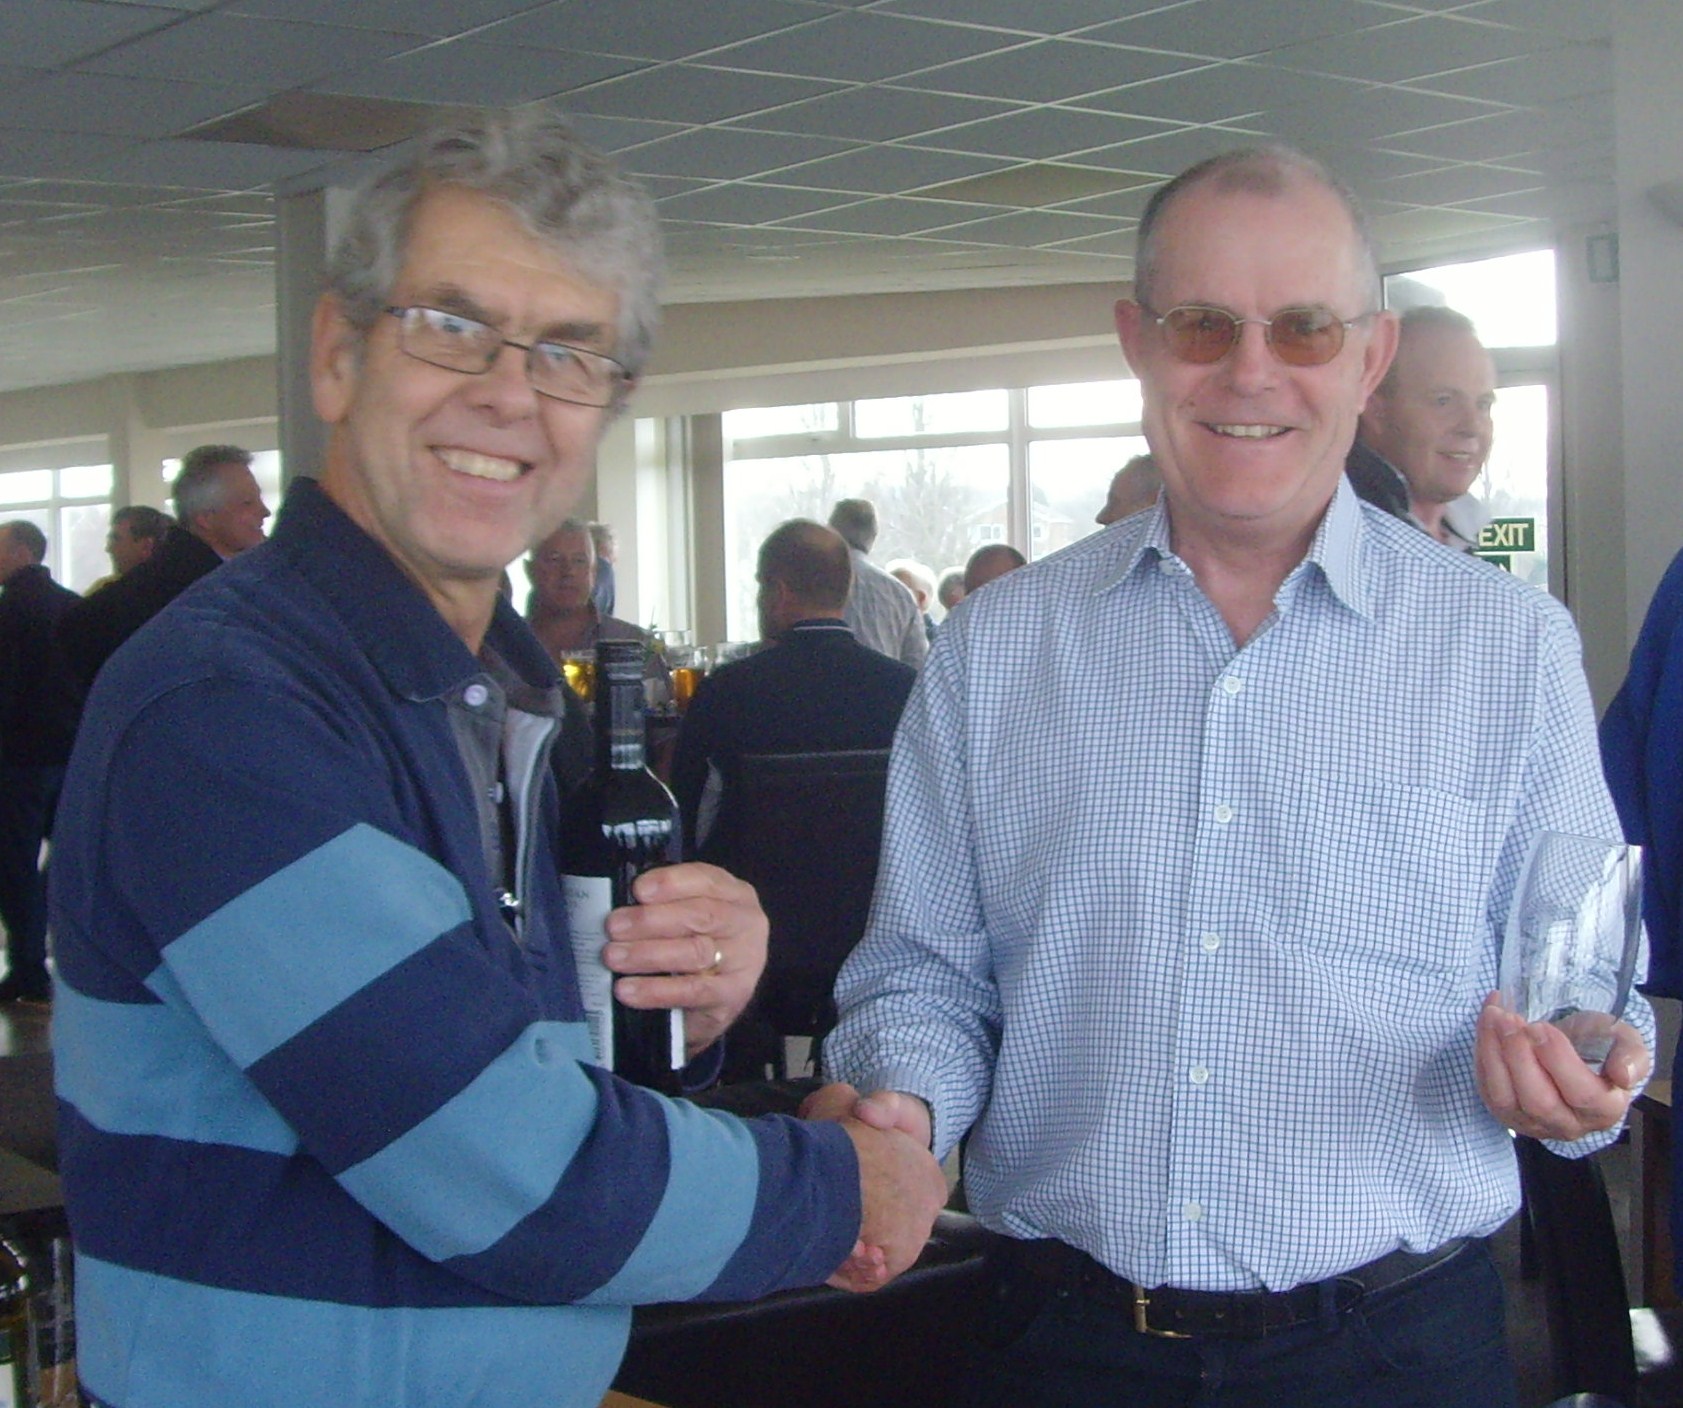 Stuart Snell receives his prize from Bob Carter